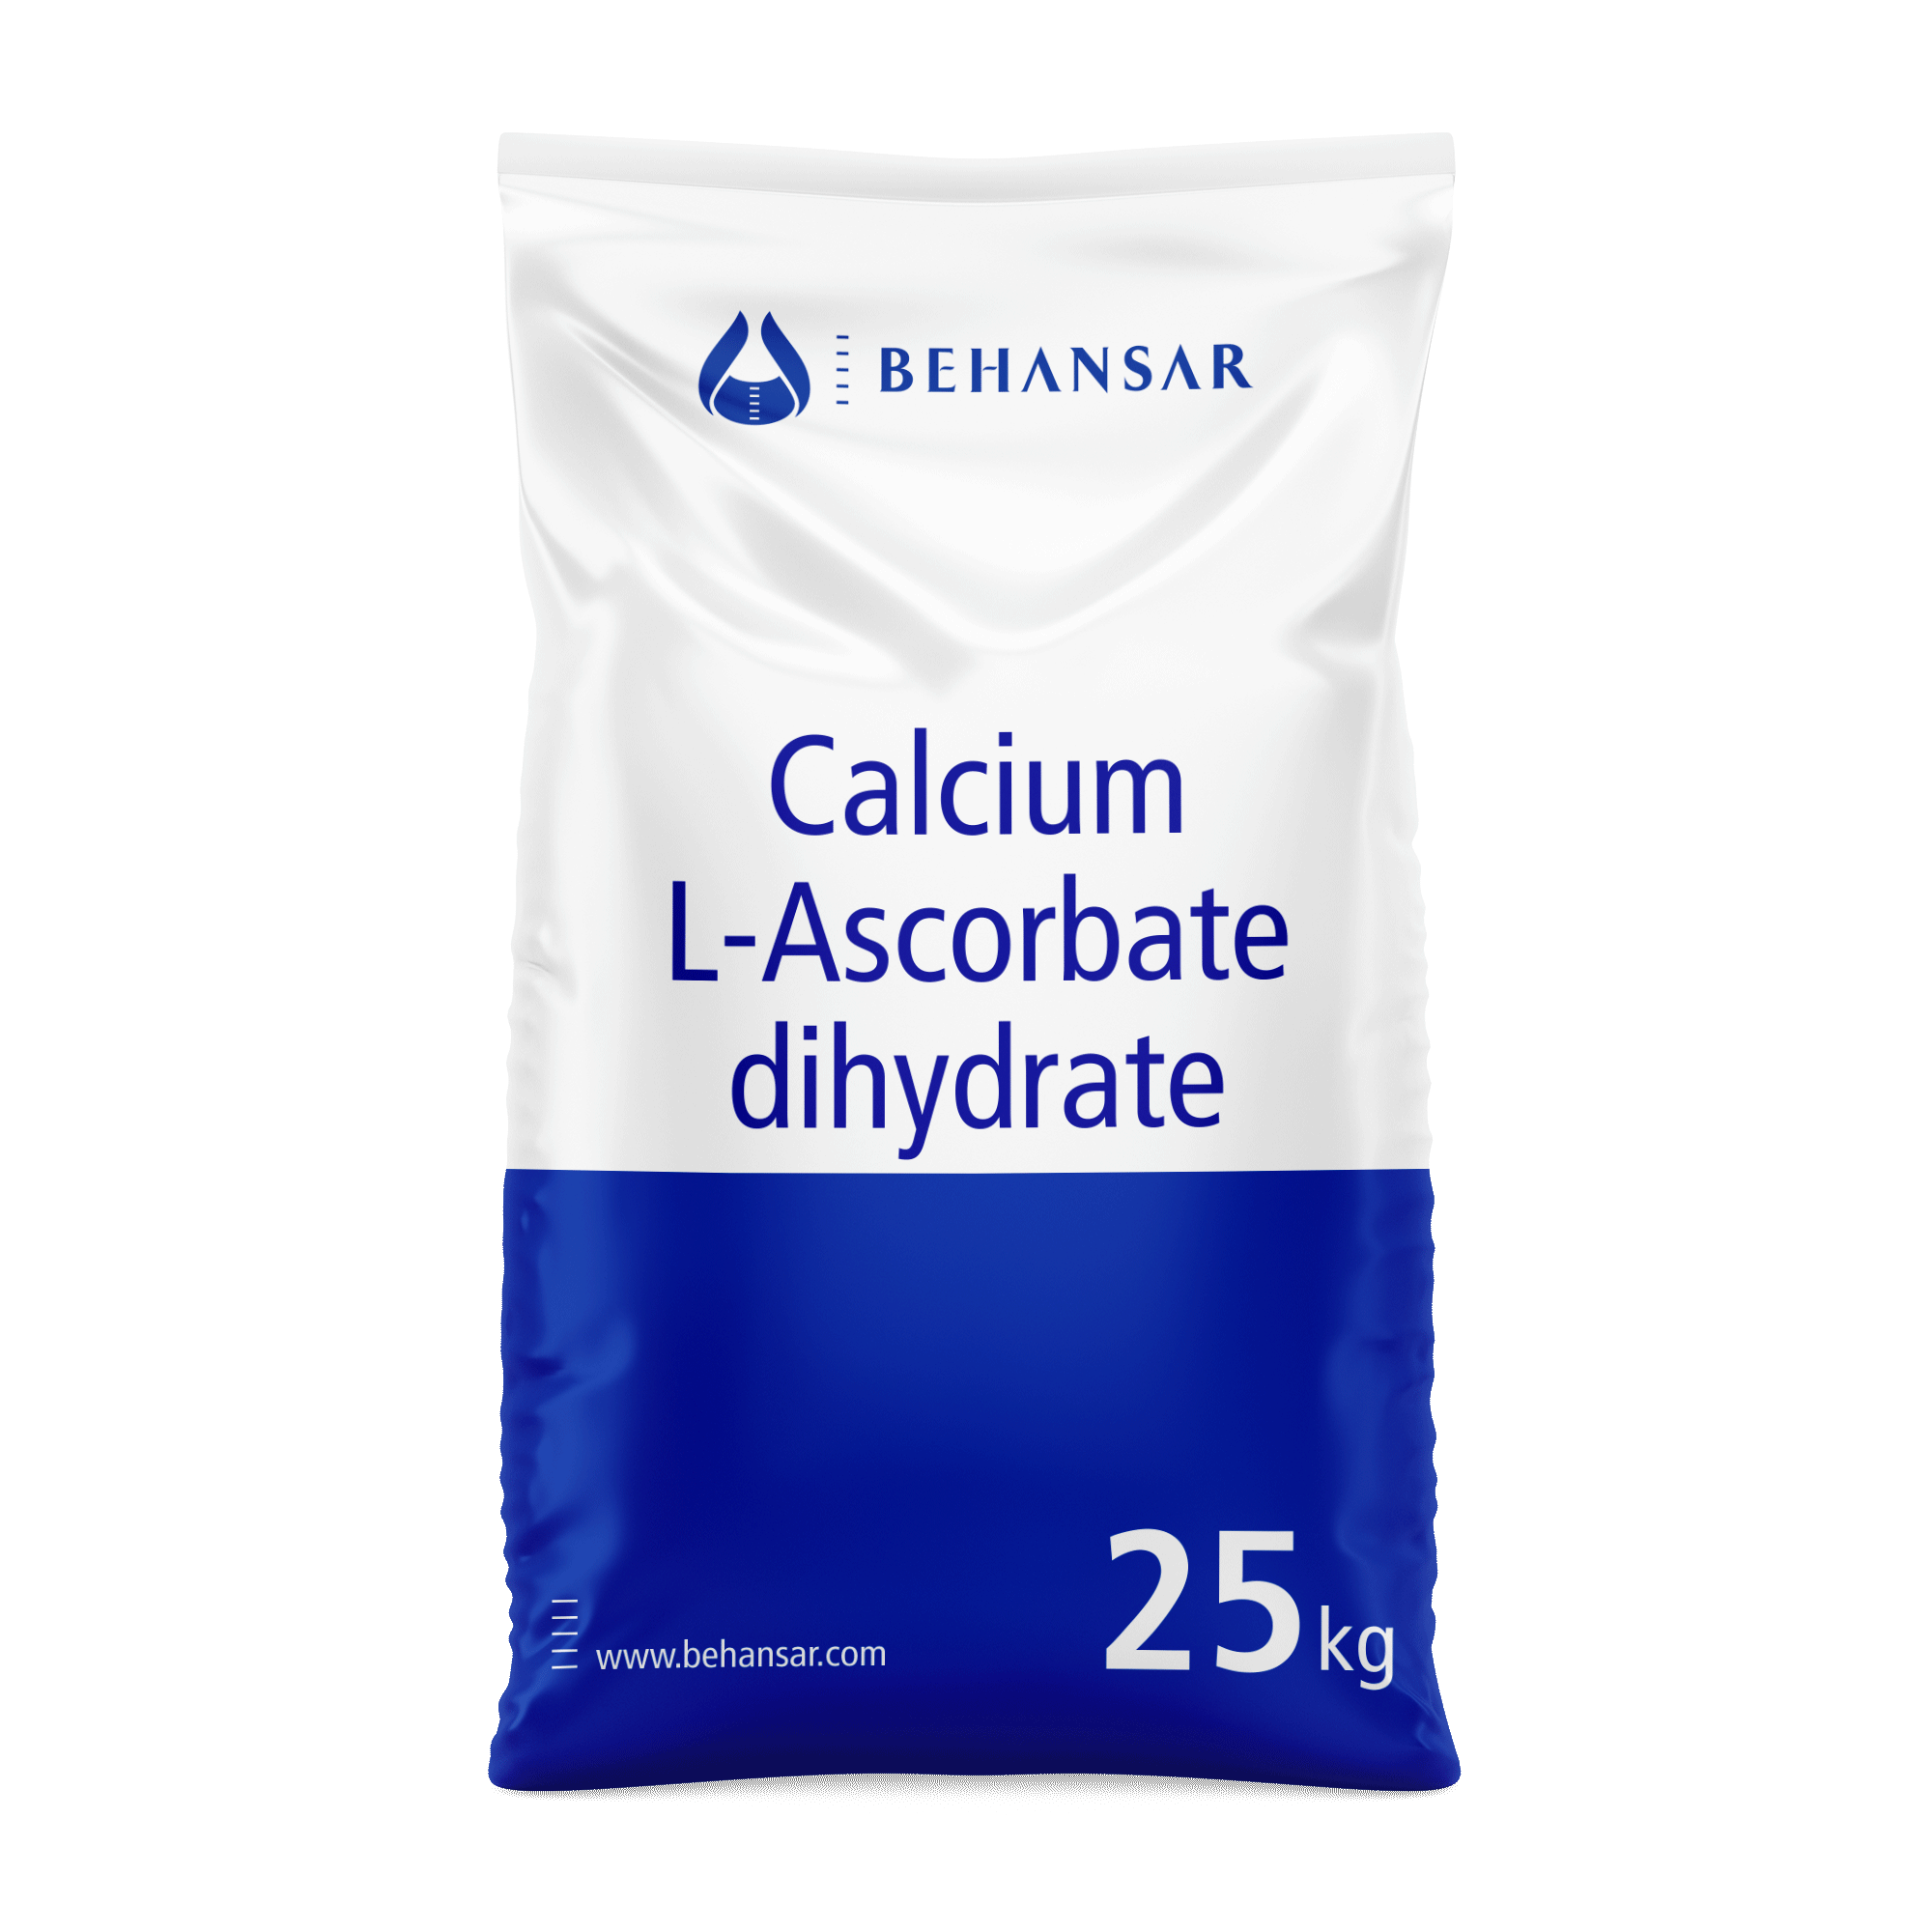 Calcium L-Ascorbate dihydrate is one of the products of Behansar Co